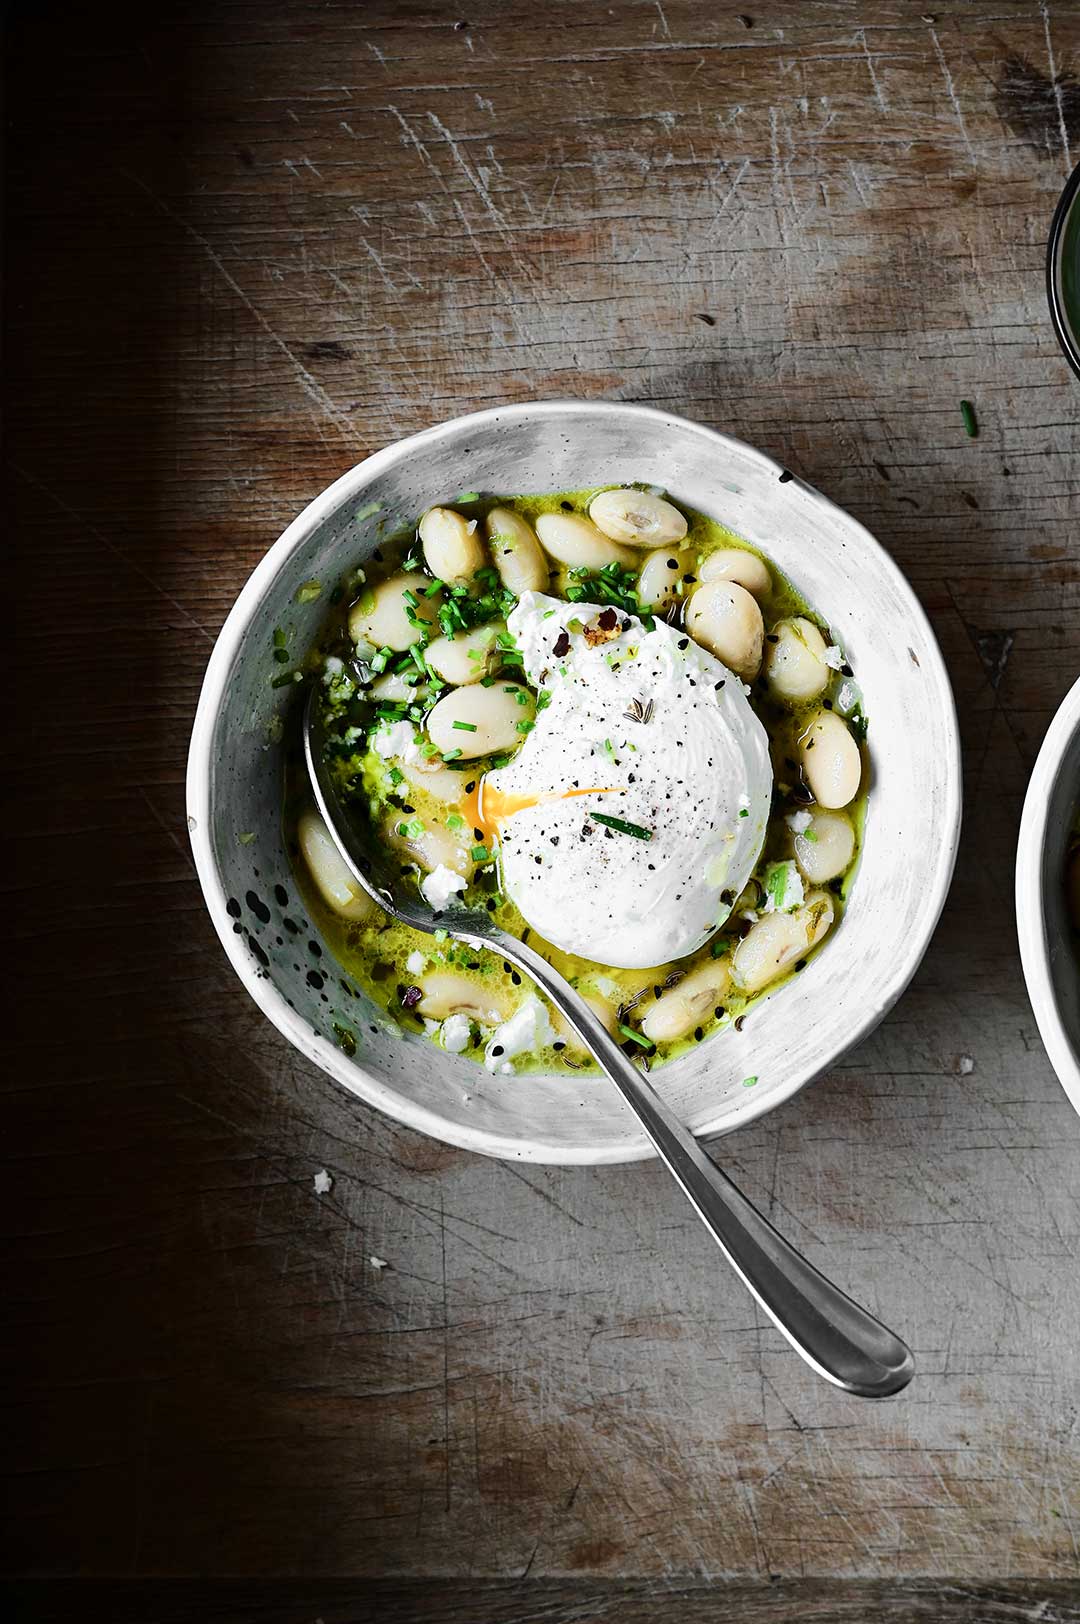 serving dumplings | White bean stew with feta and poached egg